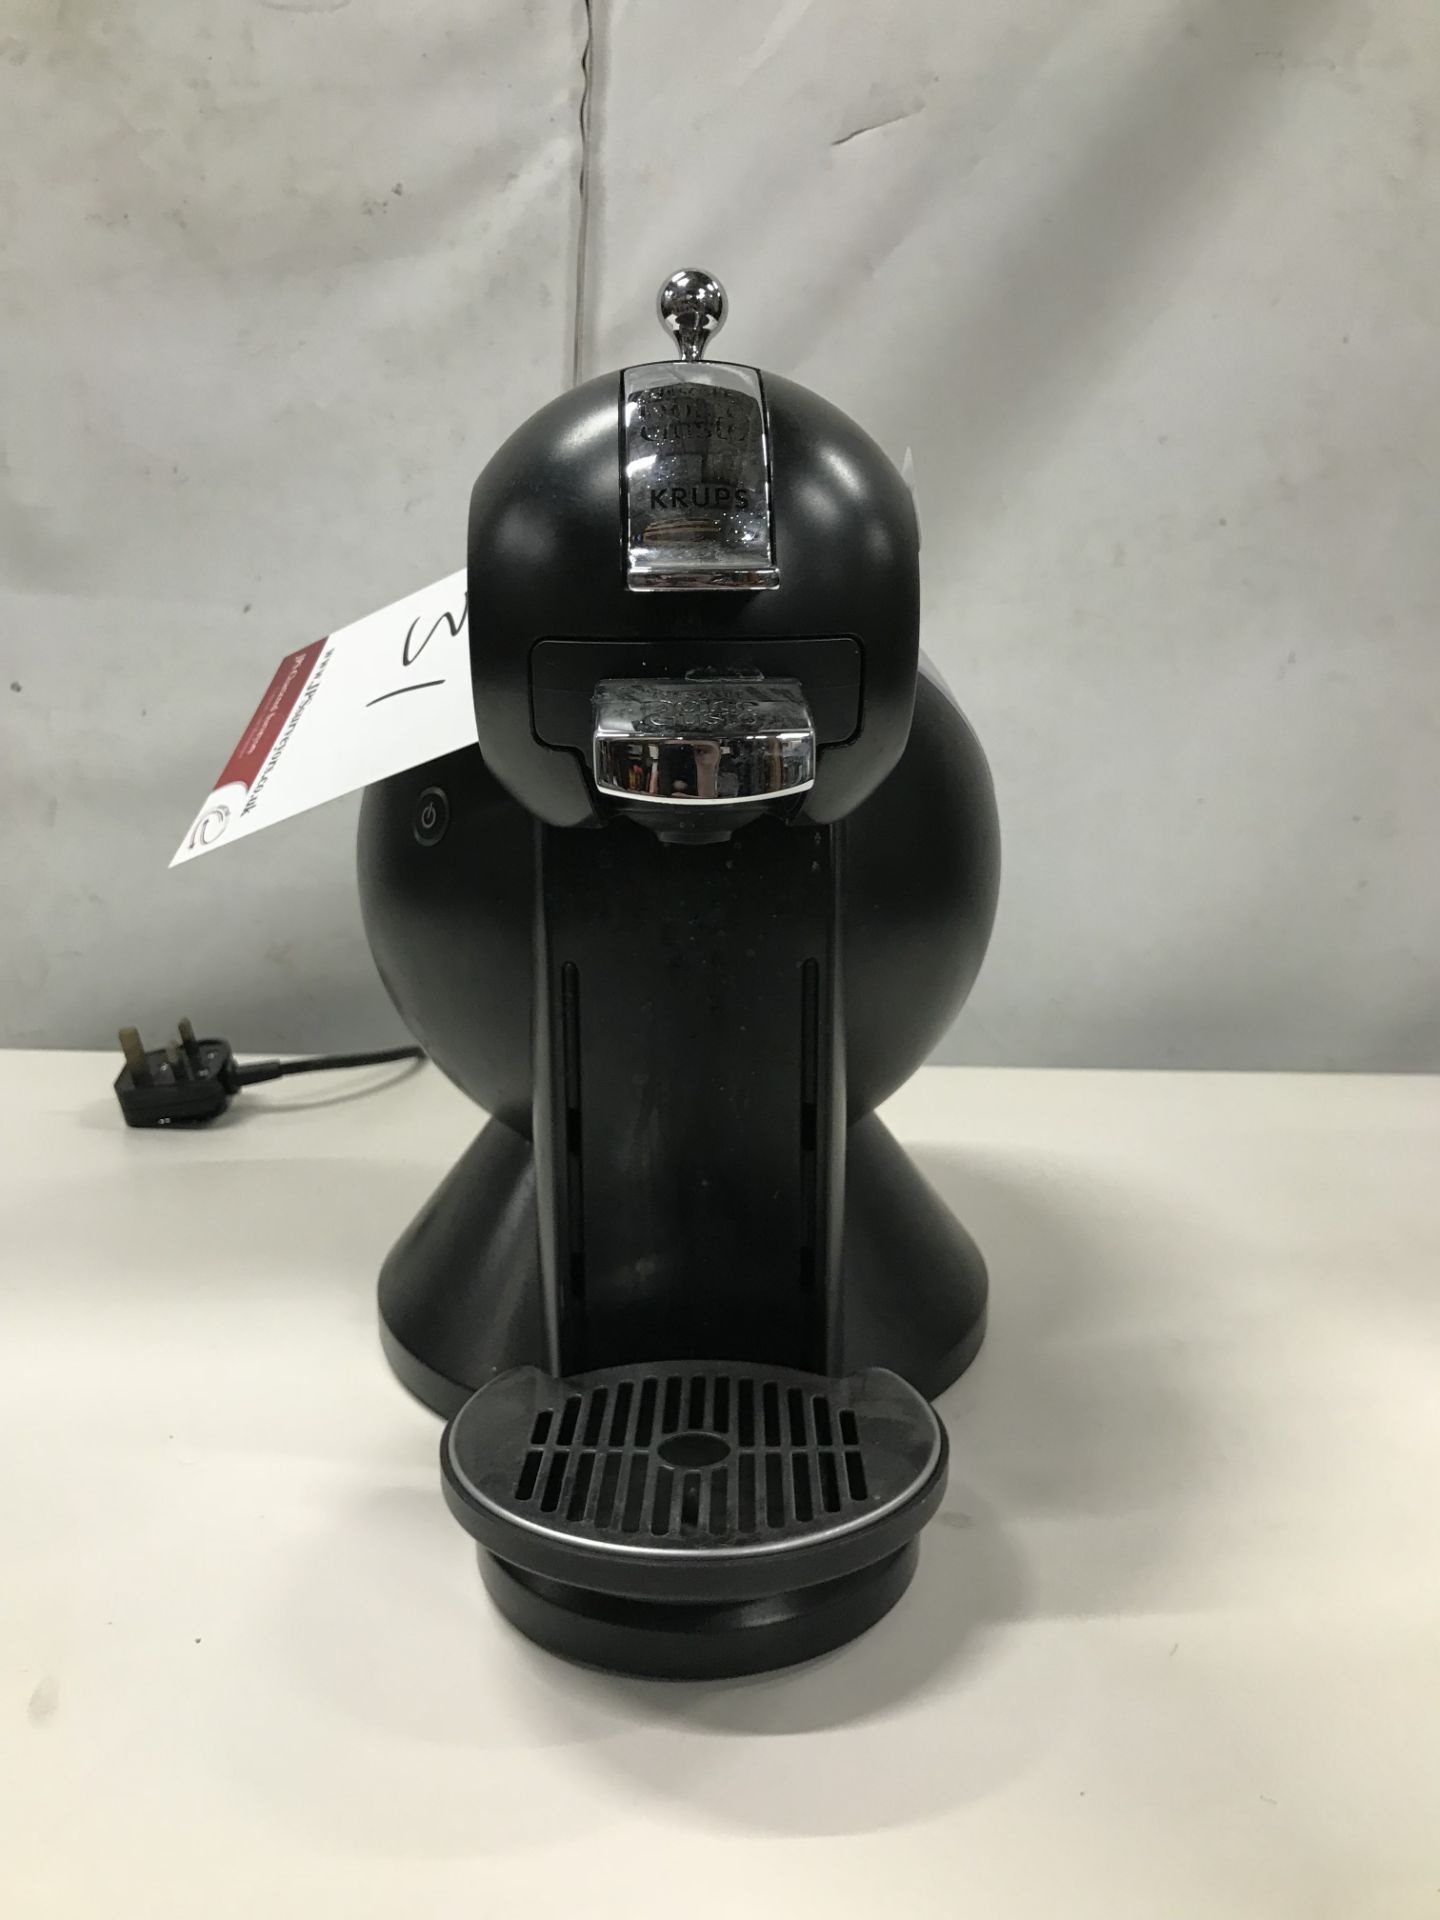 Nescafe Dolce Gusto KP2100 Coffee Machine - Image 3 of 4